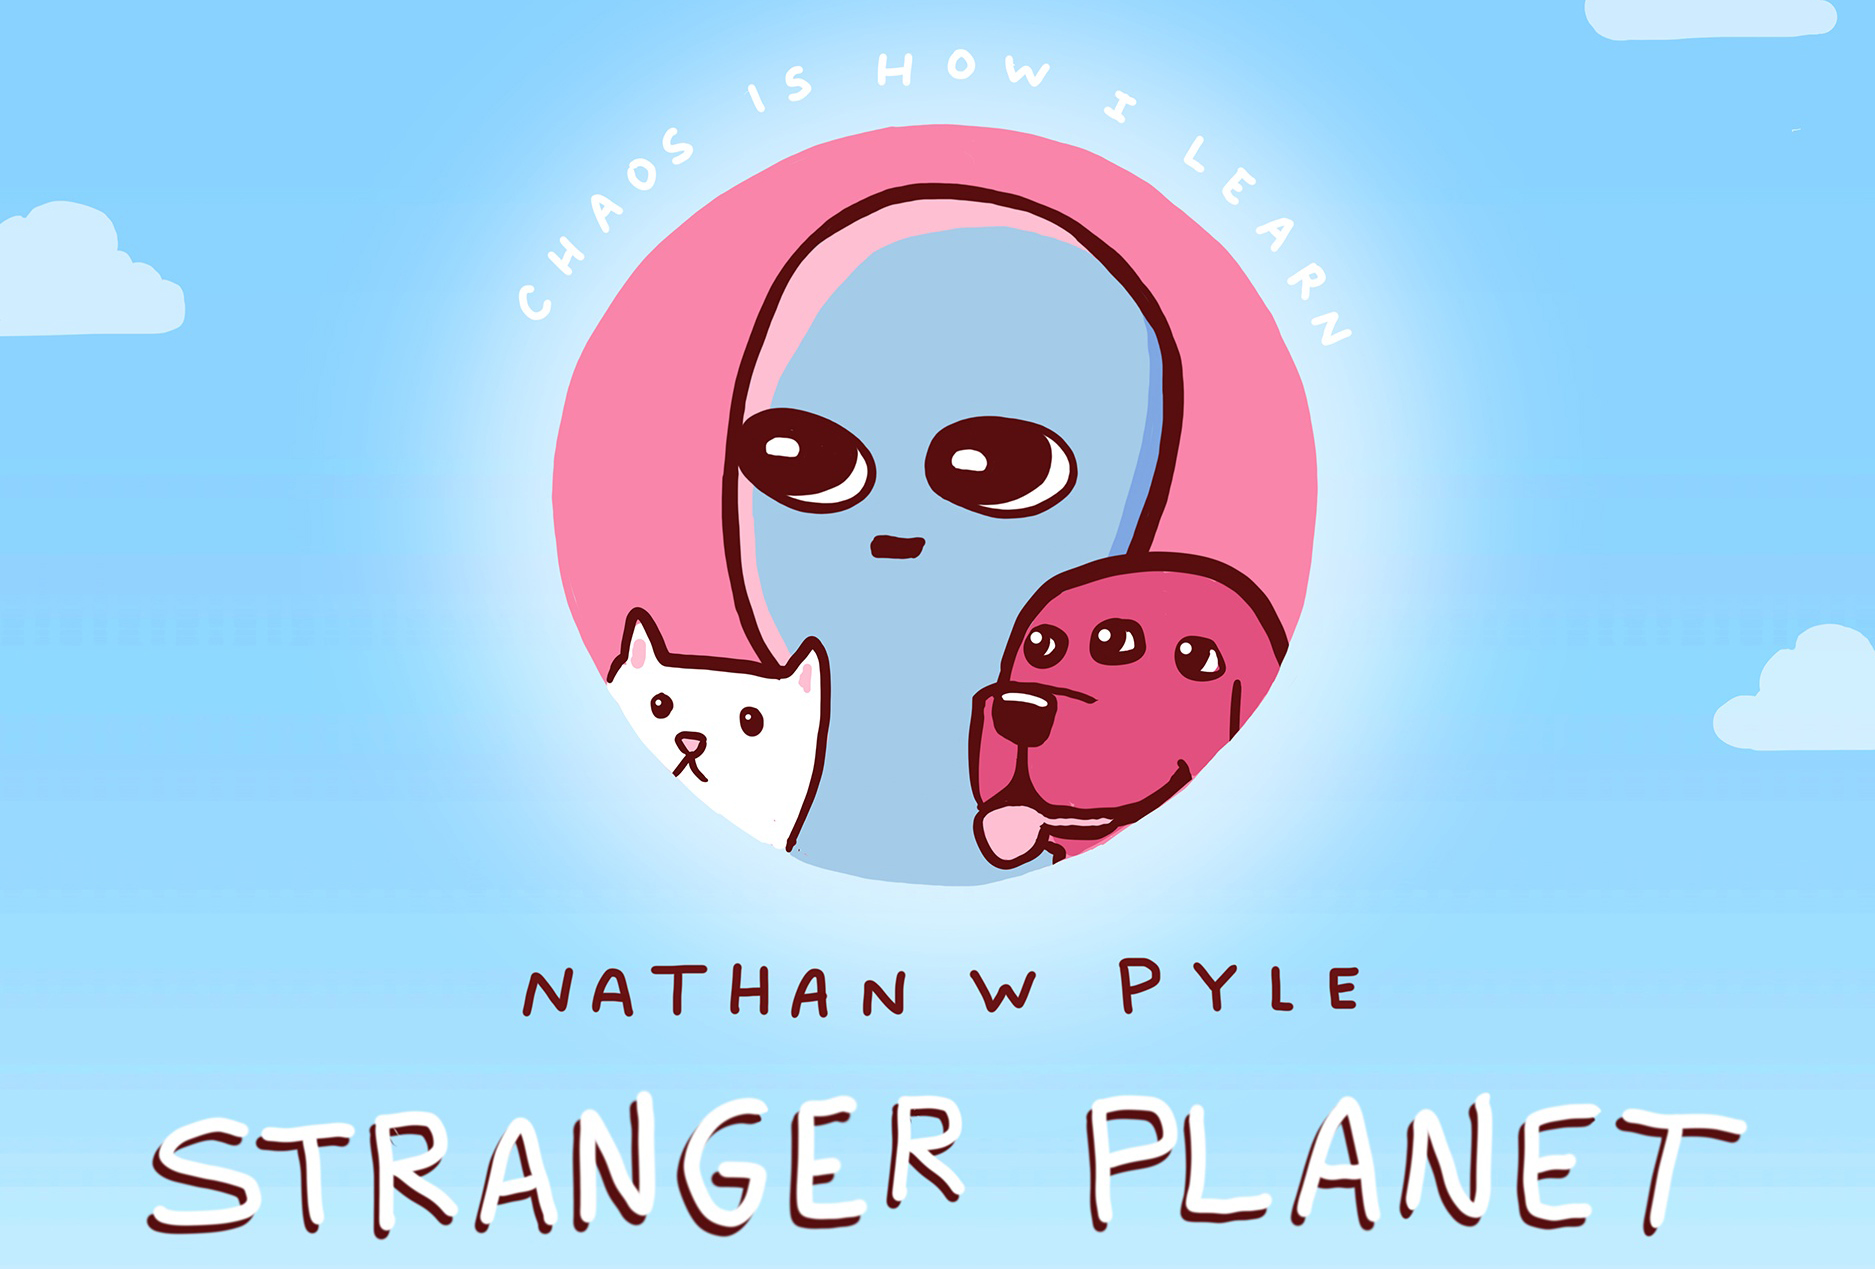 Nathan Pyle's new book, "Stranger Planet," was released on Tuesday